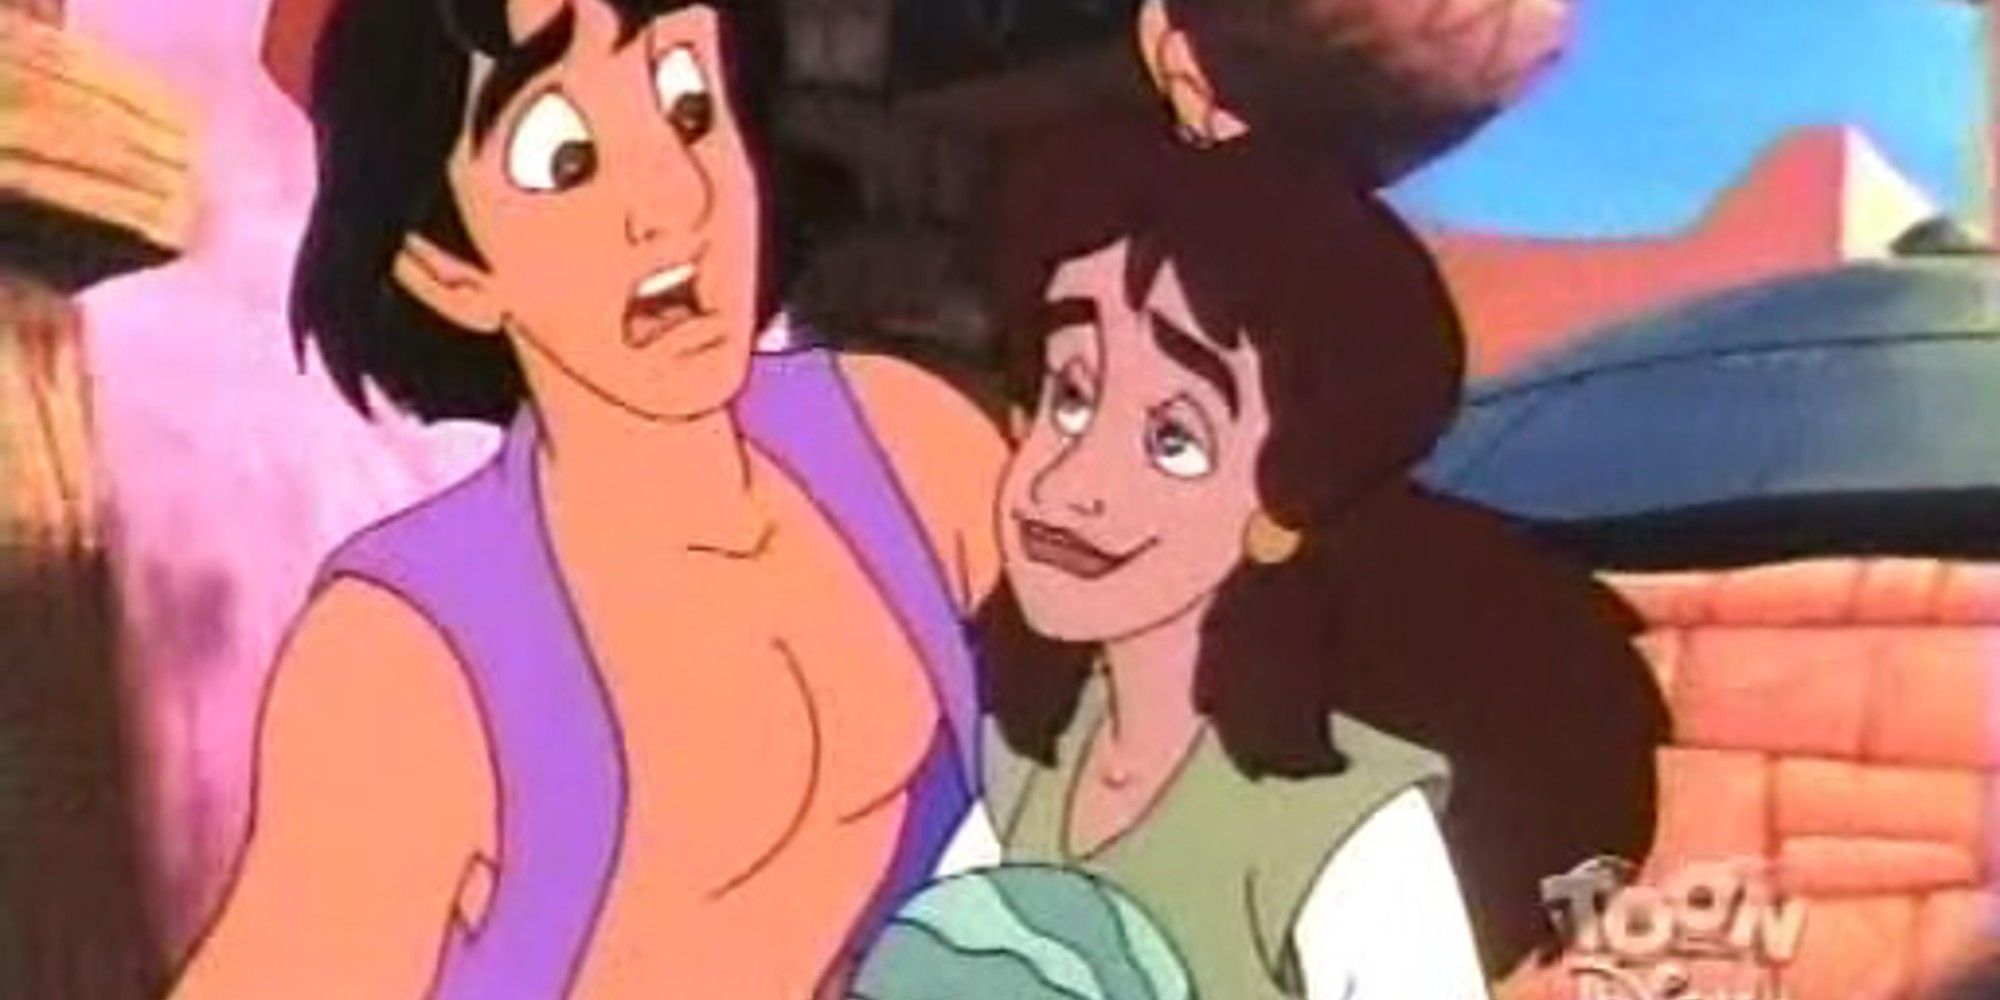 Disney's Aladdin isn't the real story—the uncensored original is much more  erotic.